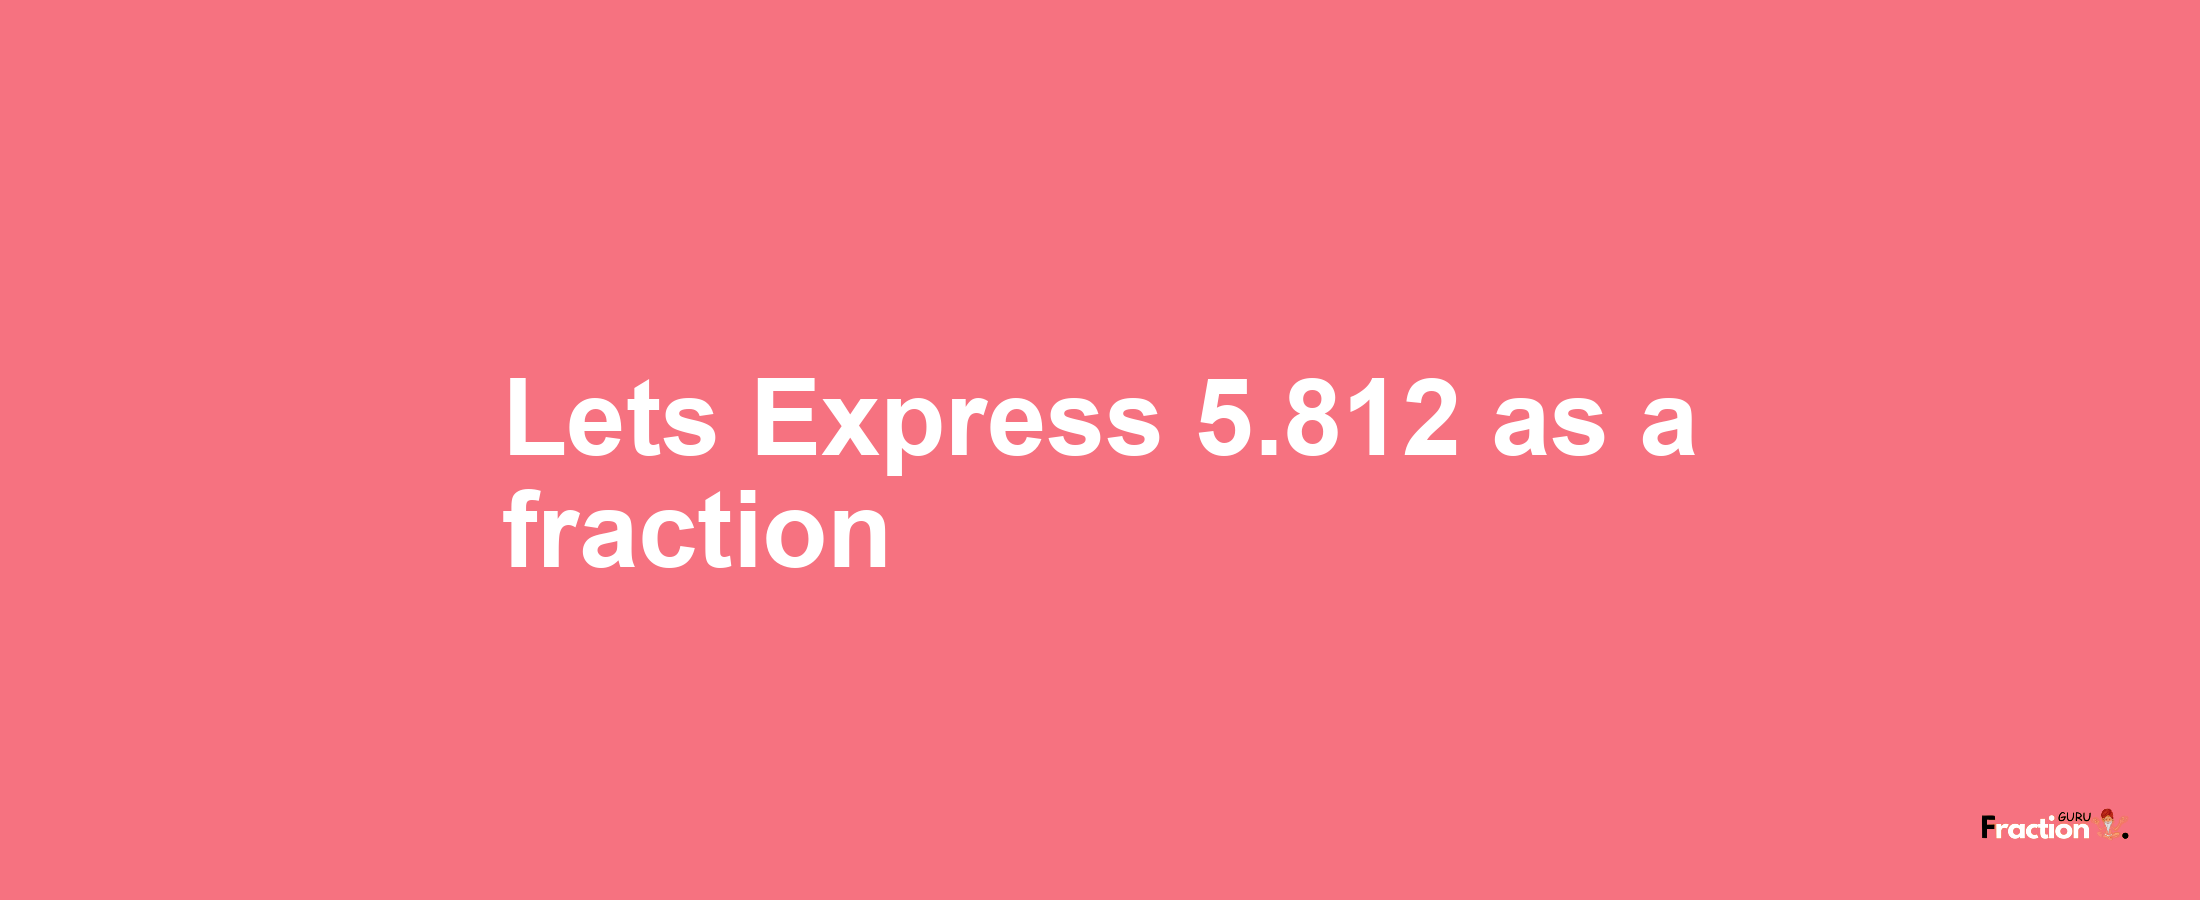 Lets Express 5.812 as afraction